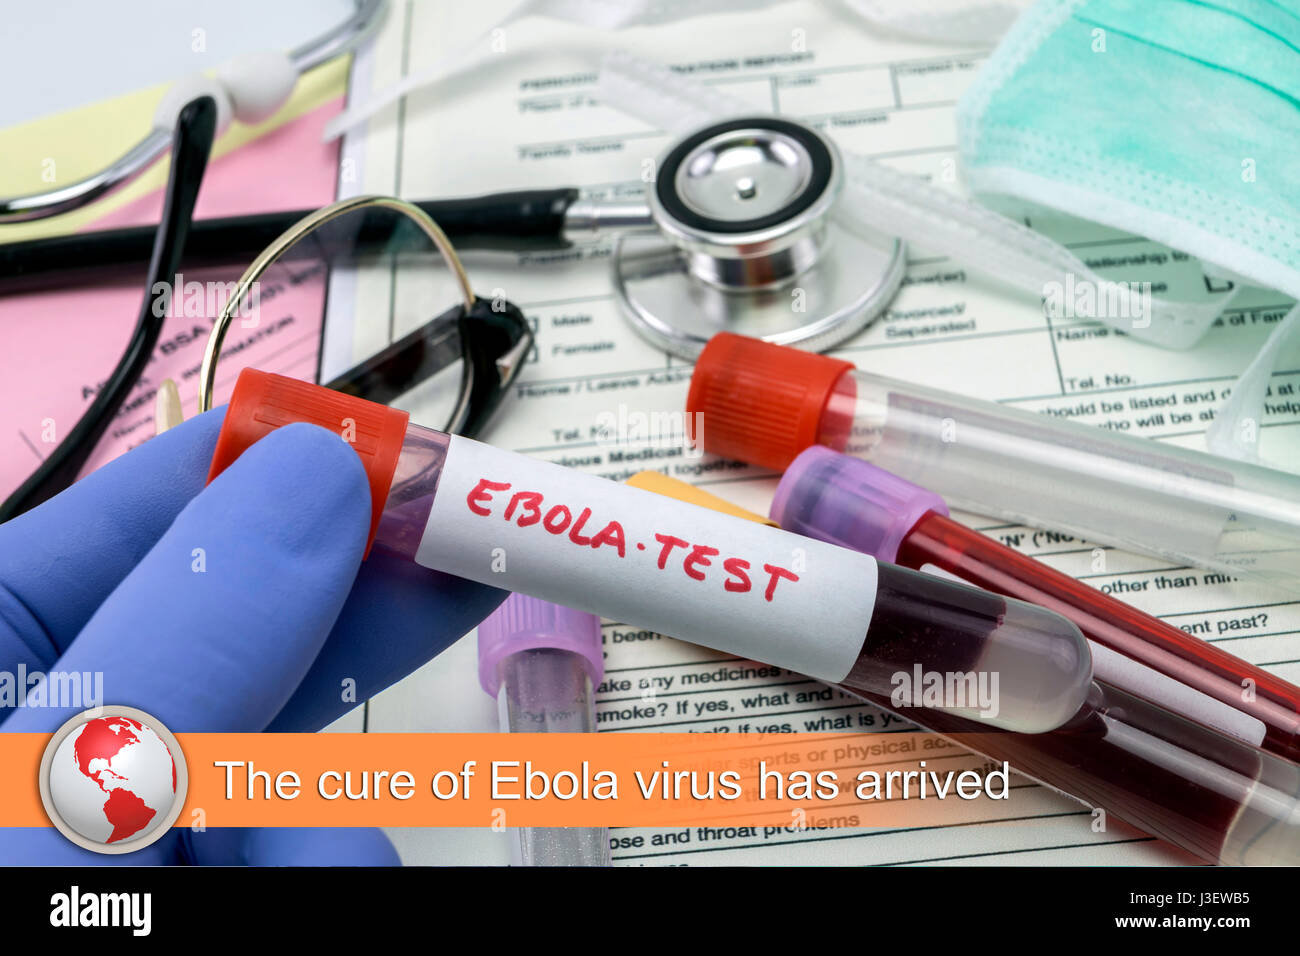 Digital composite of news flash with medical imagery, The cure fo Ebola virus has arrived Stock Photo